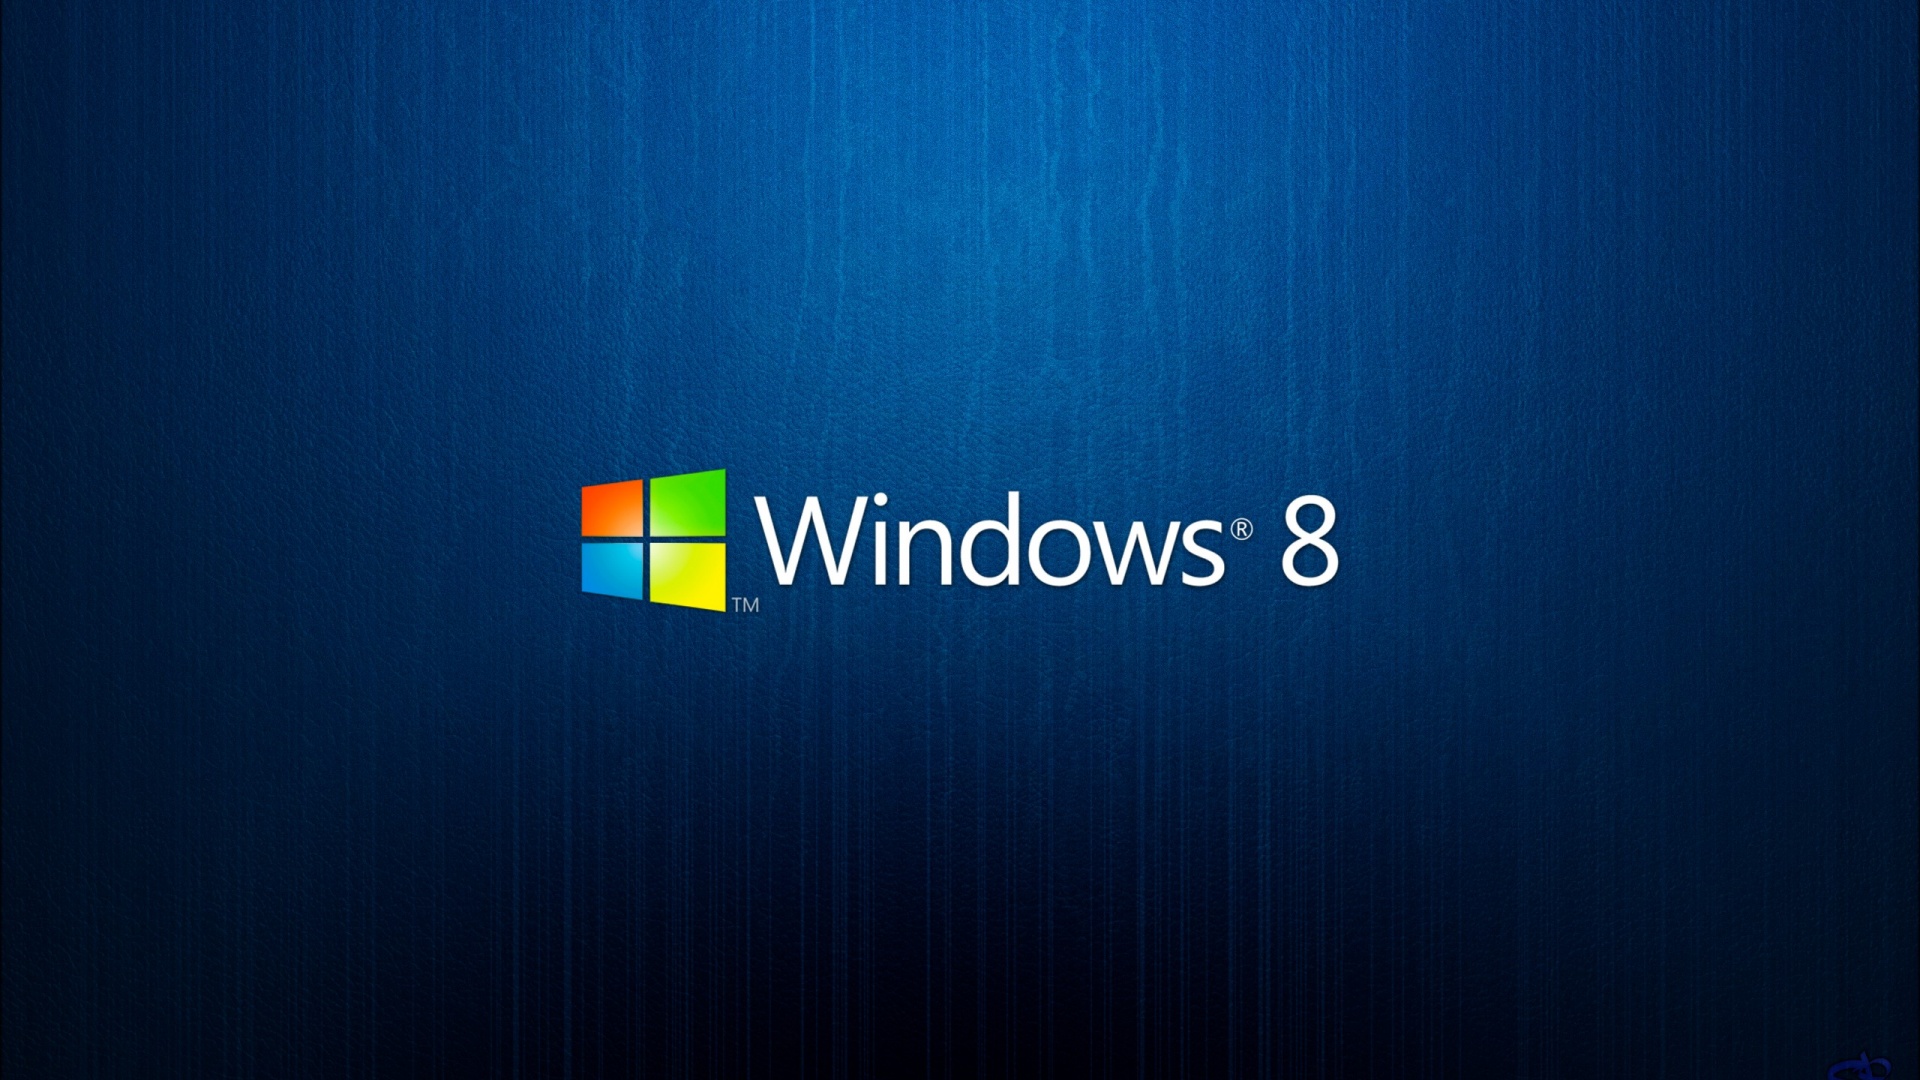  of widescreen HD wallpapers for Windows 8 found around the net